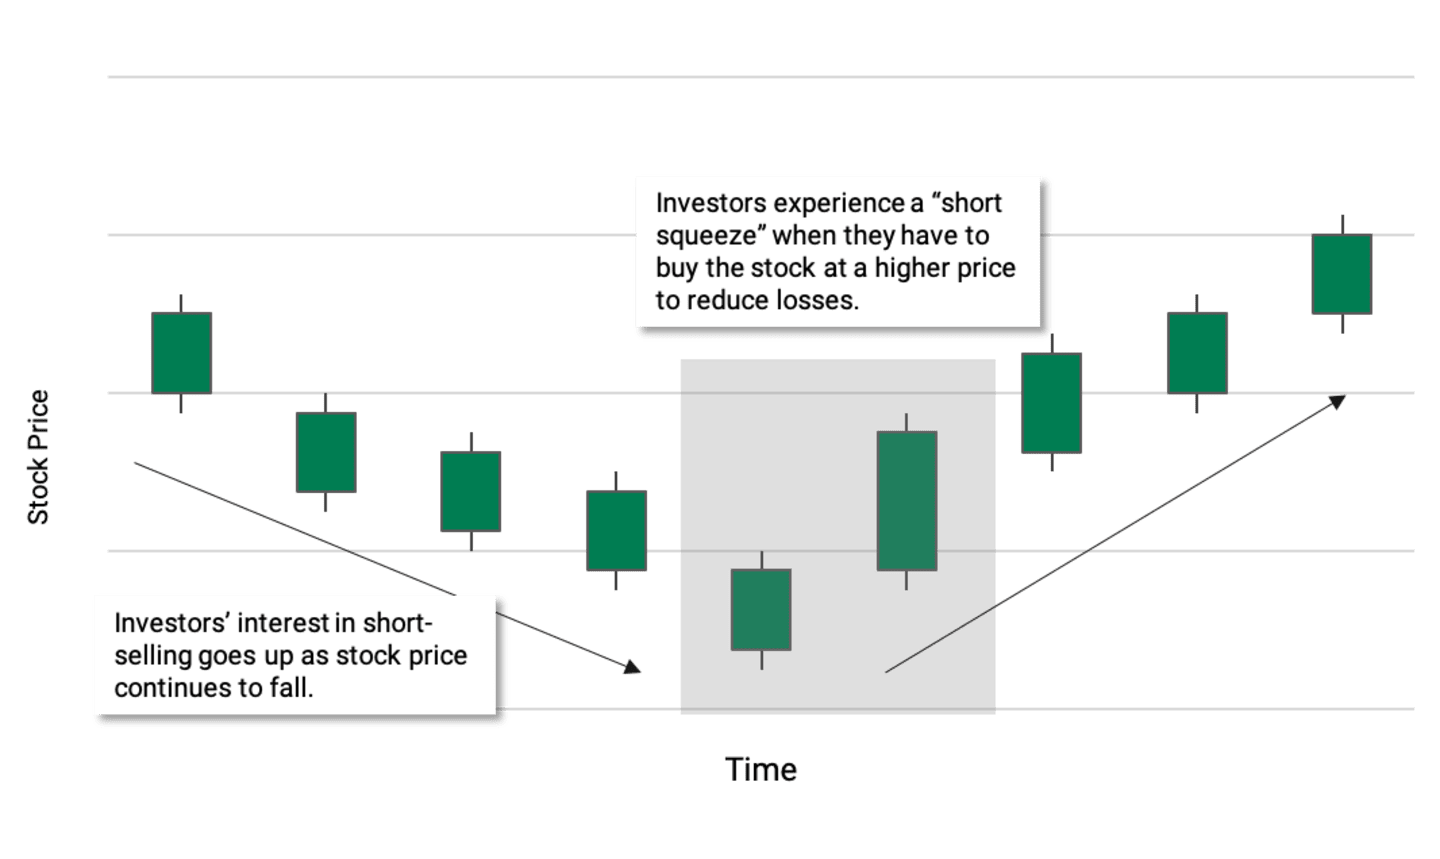 Graphic shows how investors’ interest in short-selling goes up as stock price continues to fall. Investors experience a “short squeeze” when they have to buy the stock at a higher price to reduce losses.